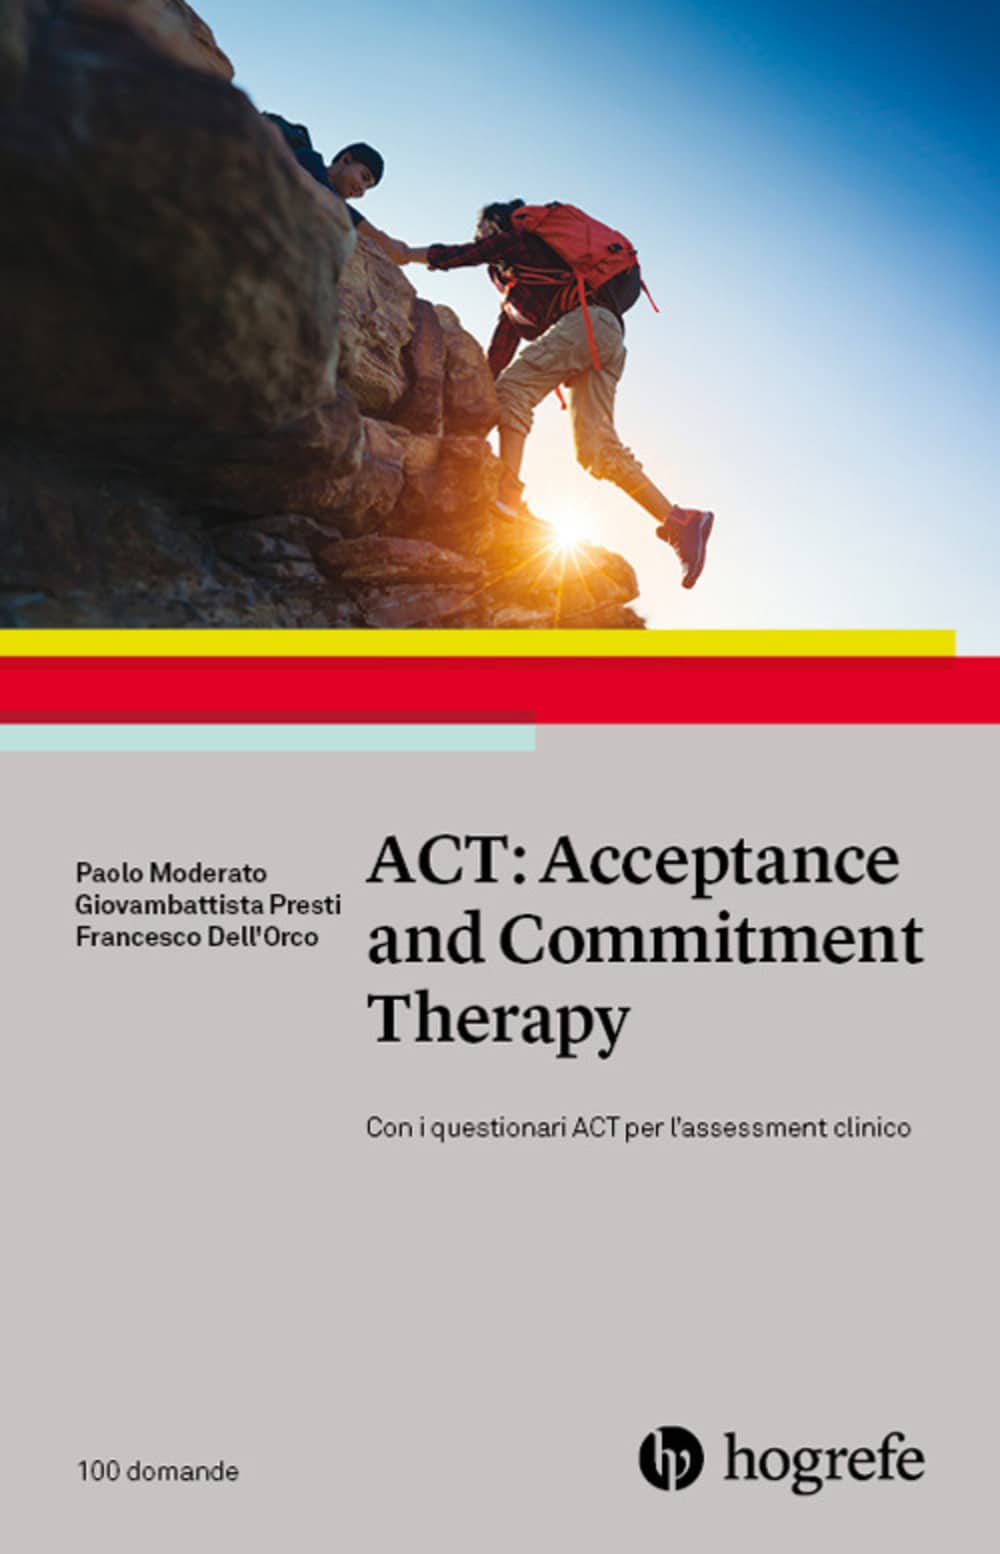 ACT Acceptance and Commitment Therapy (2020) - Recensione